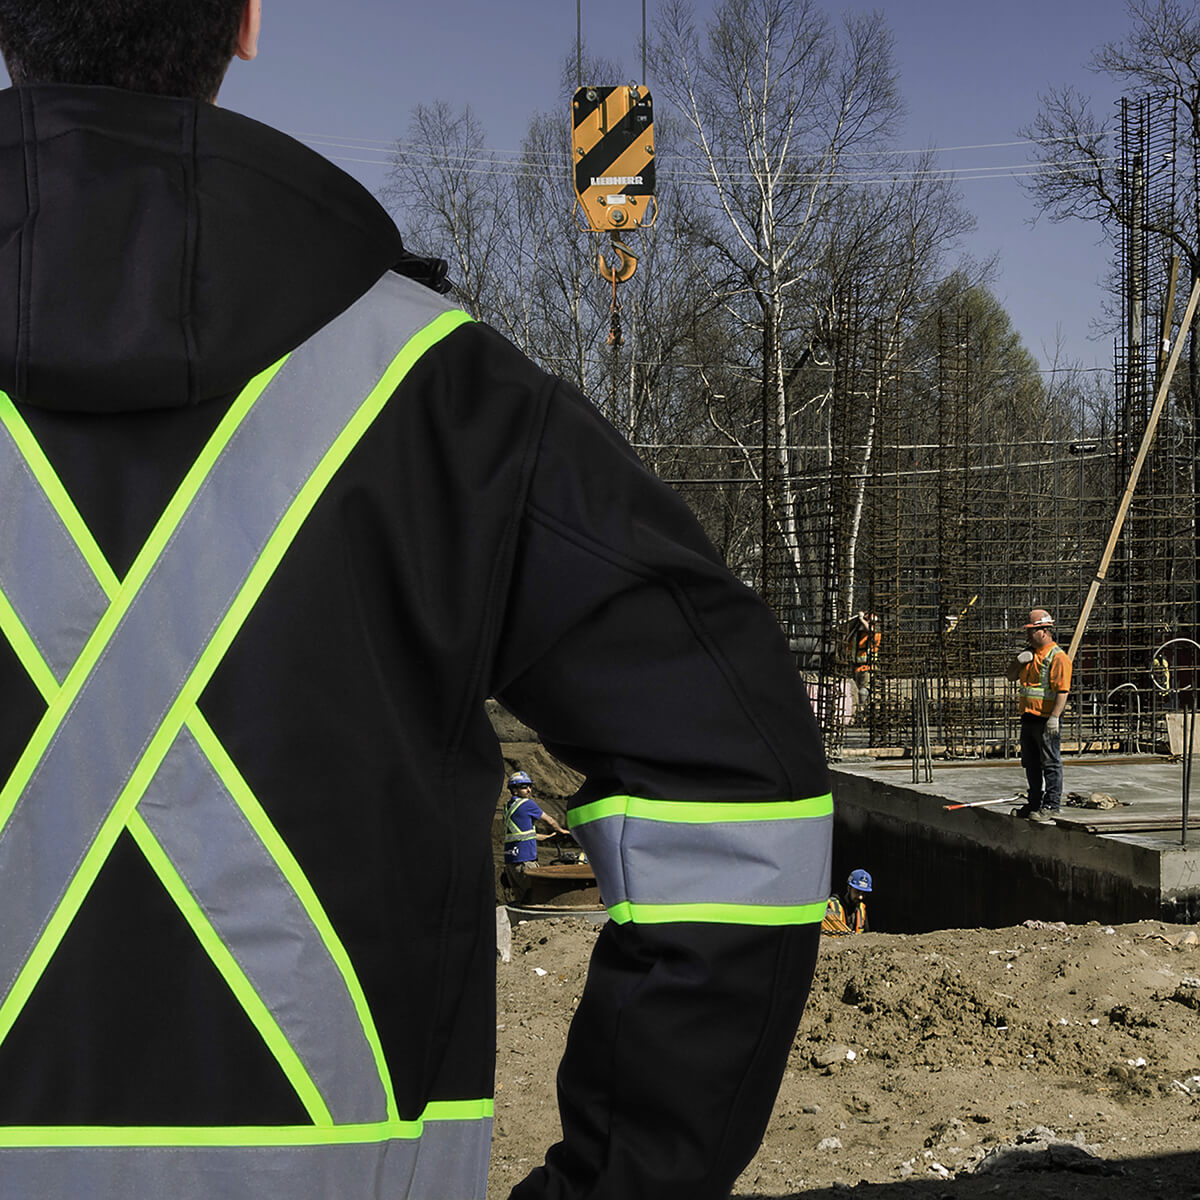 9 Things You Need to Know About High-Visibility Clothing